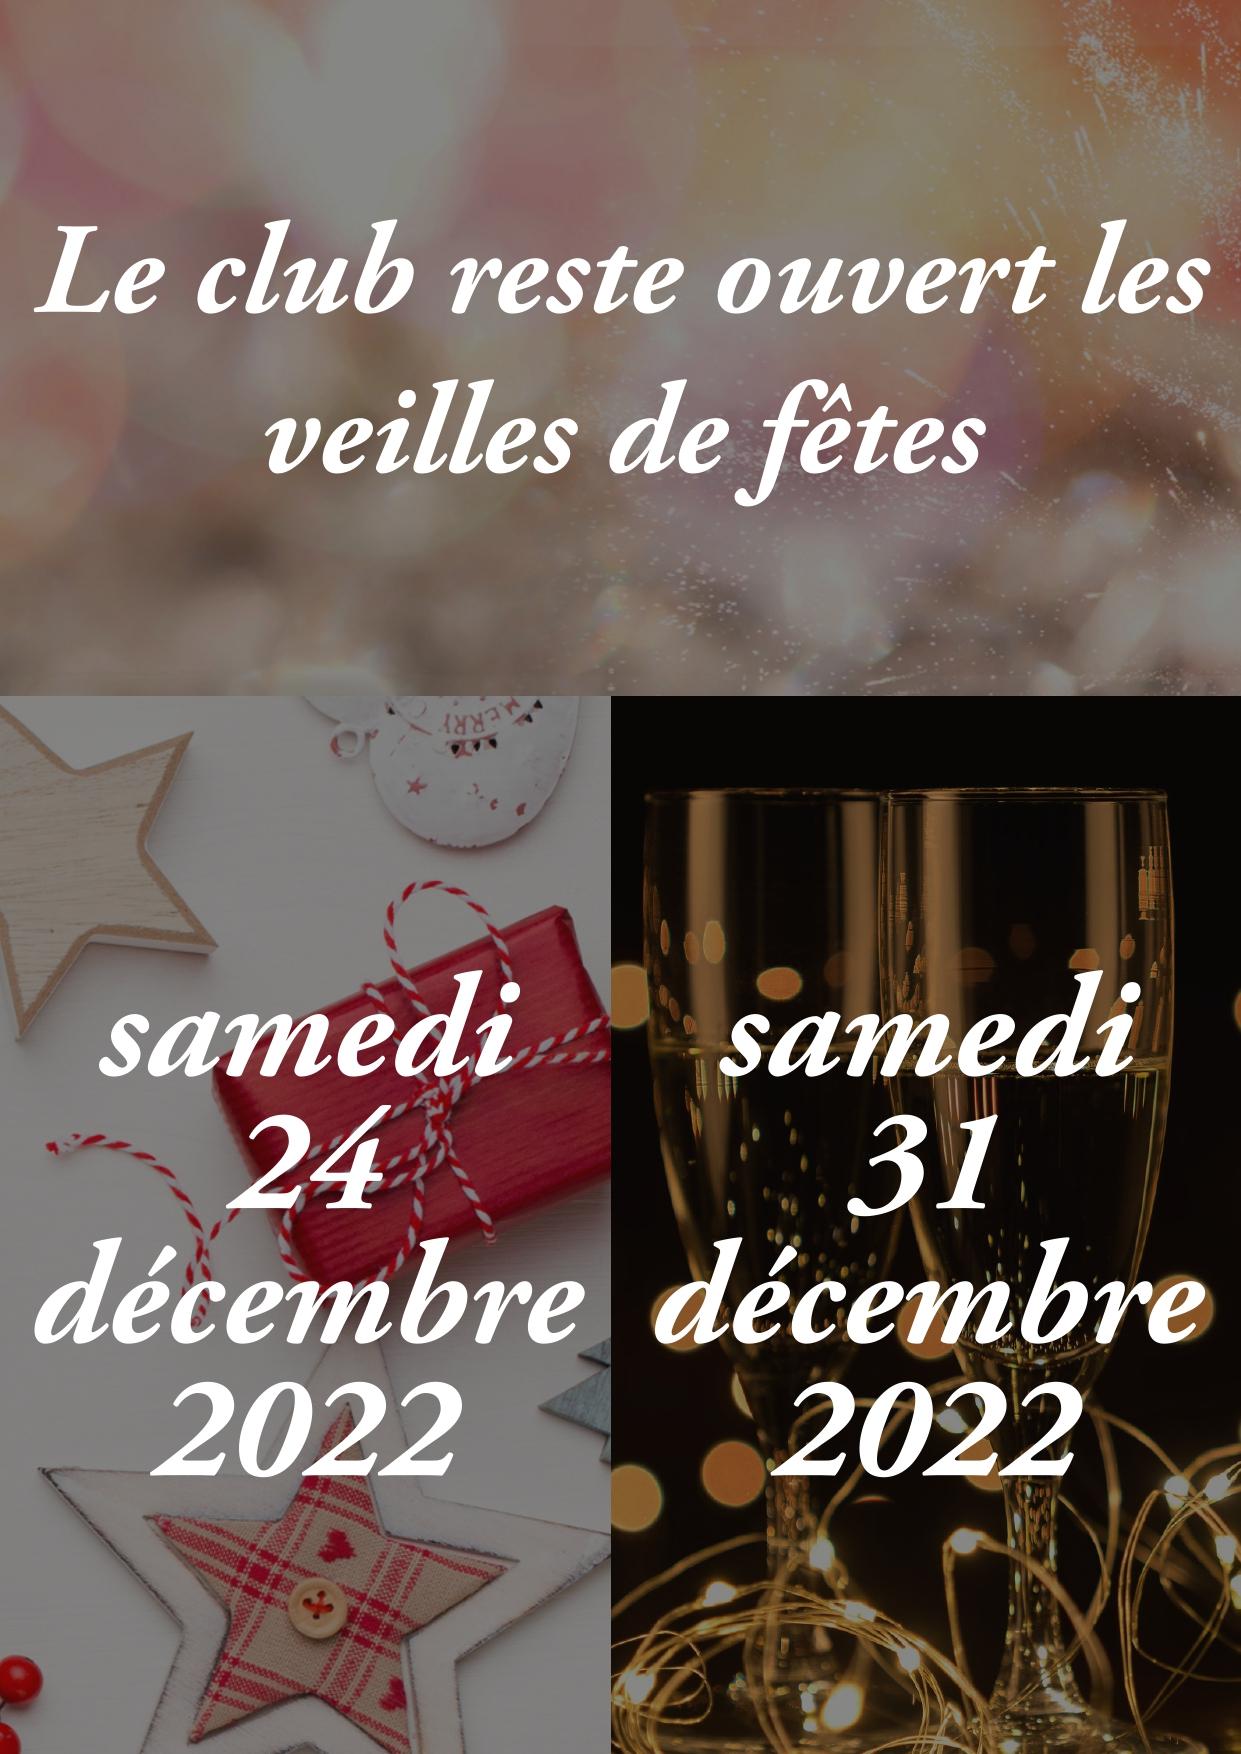 Affiche noel 2022 pages to jpg 0001